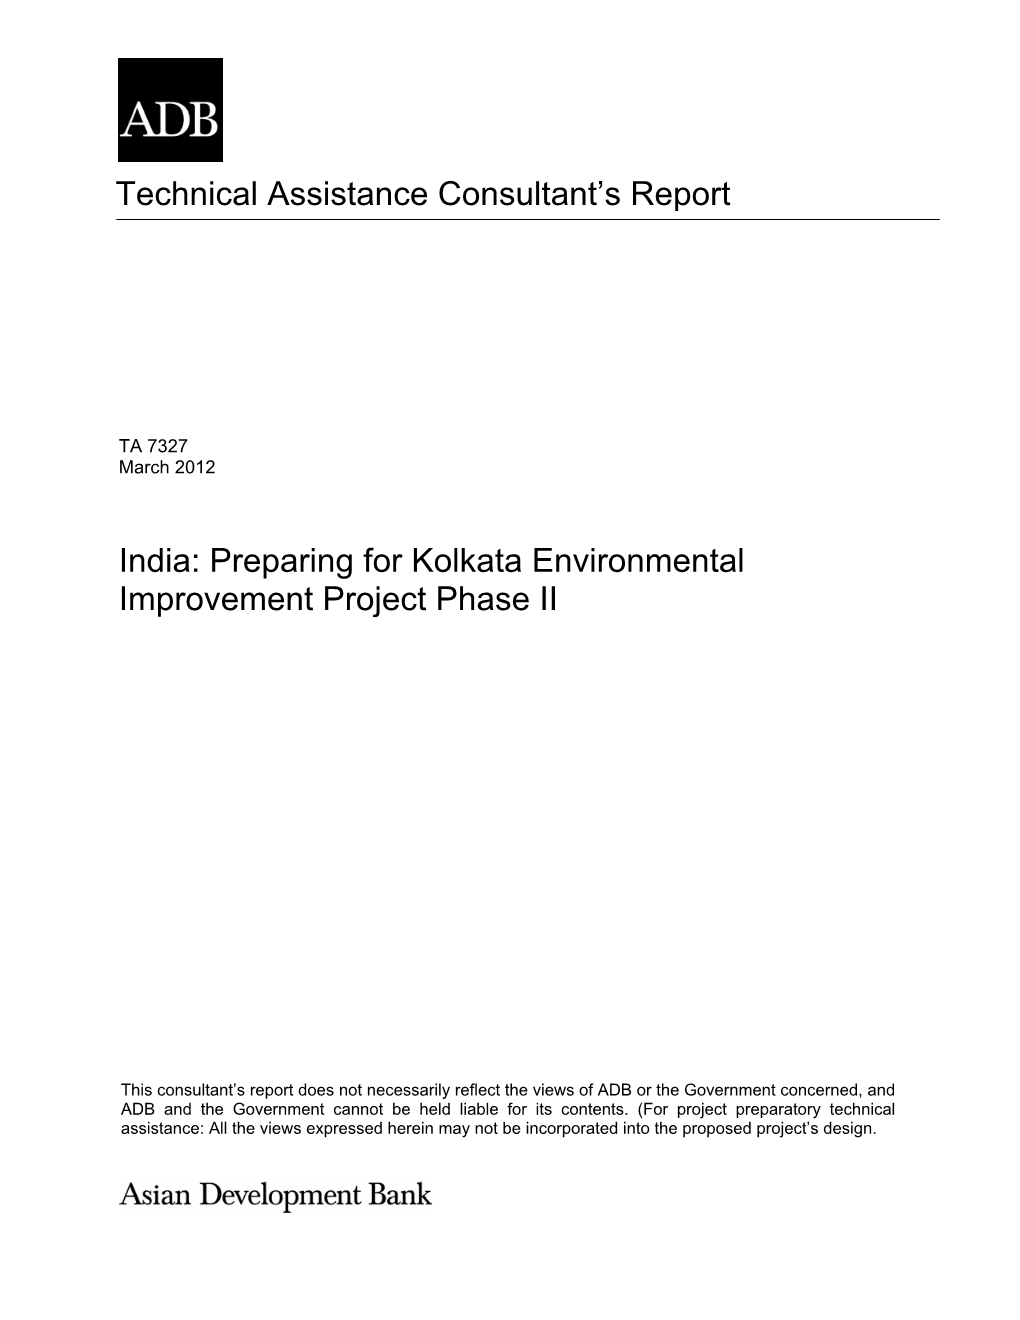 Technical Assistance Consultant's Report India: Preparing for Kolkata Environmental Improvement Project Phase II